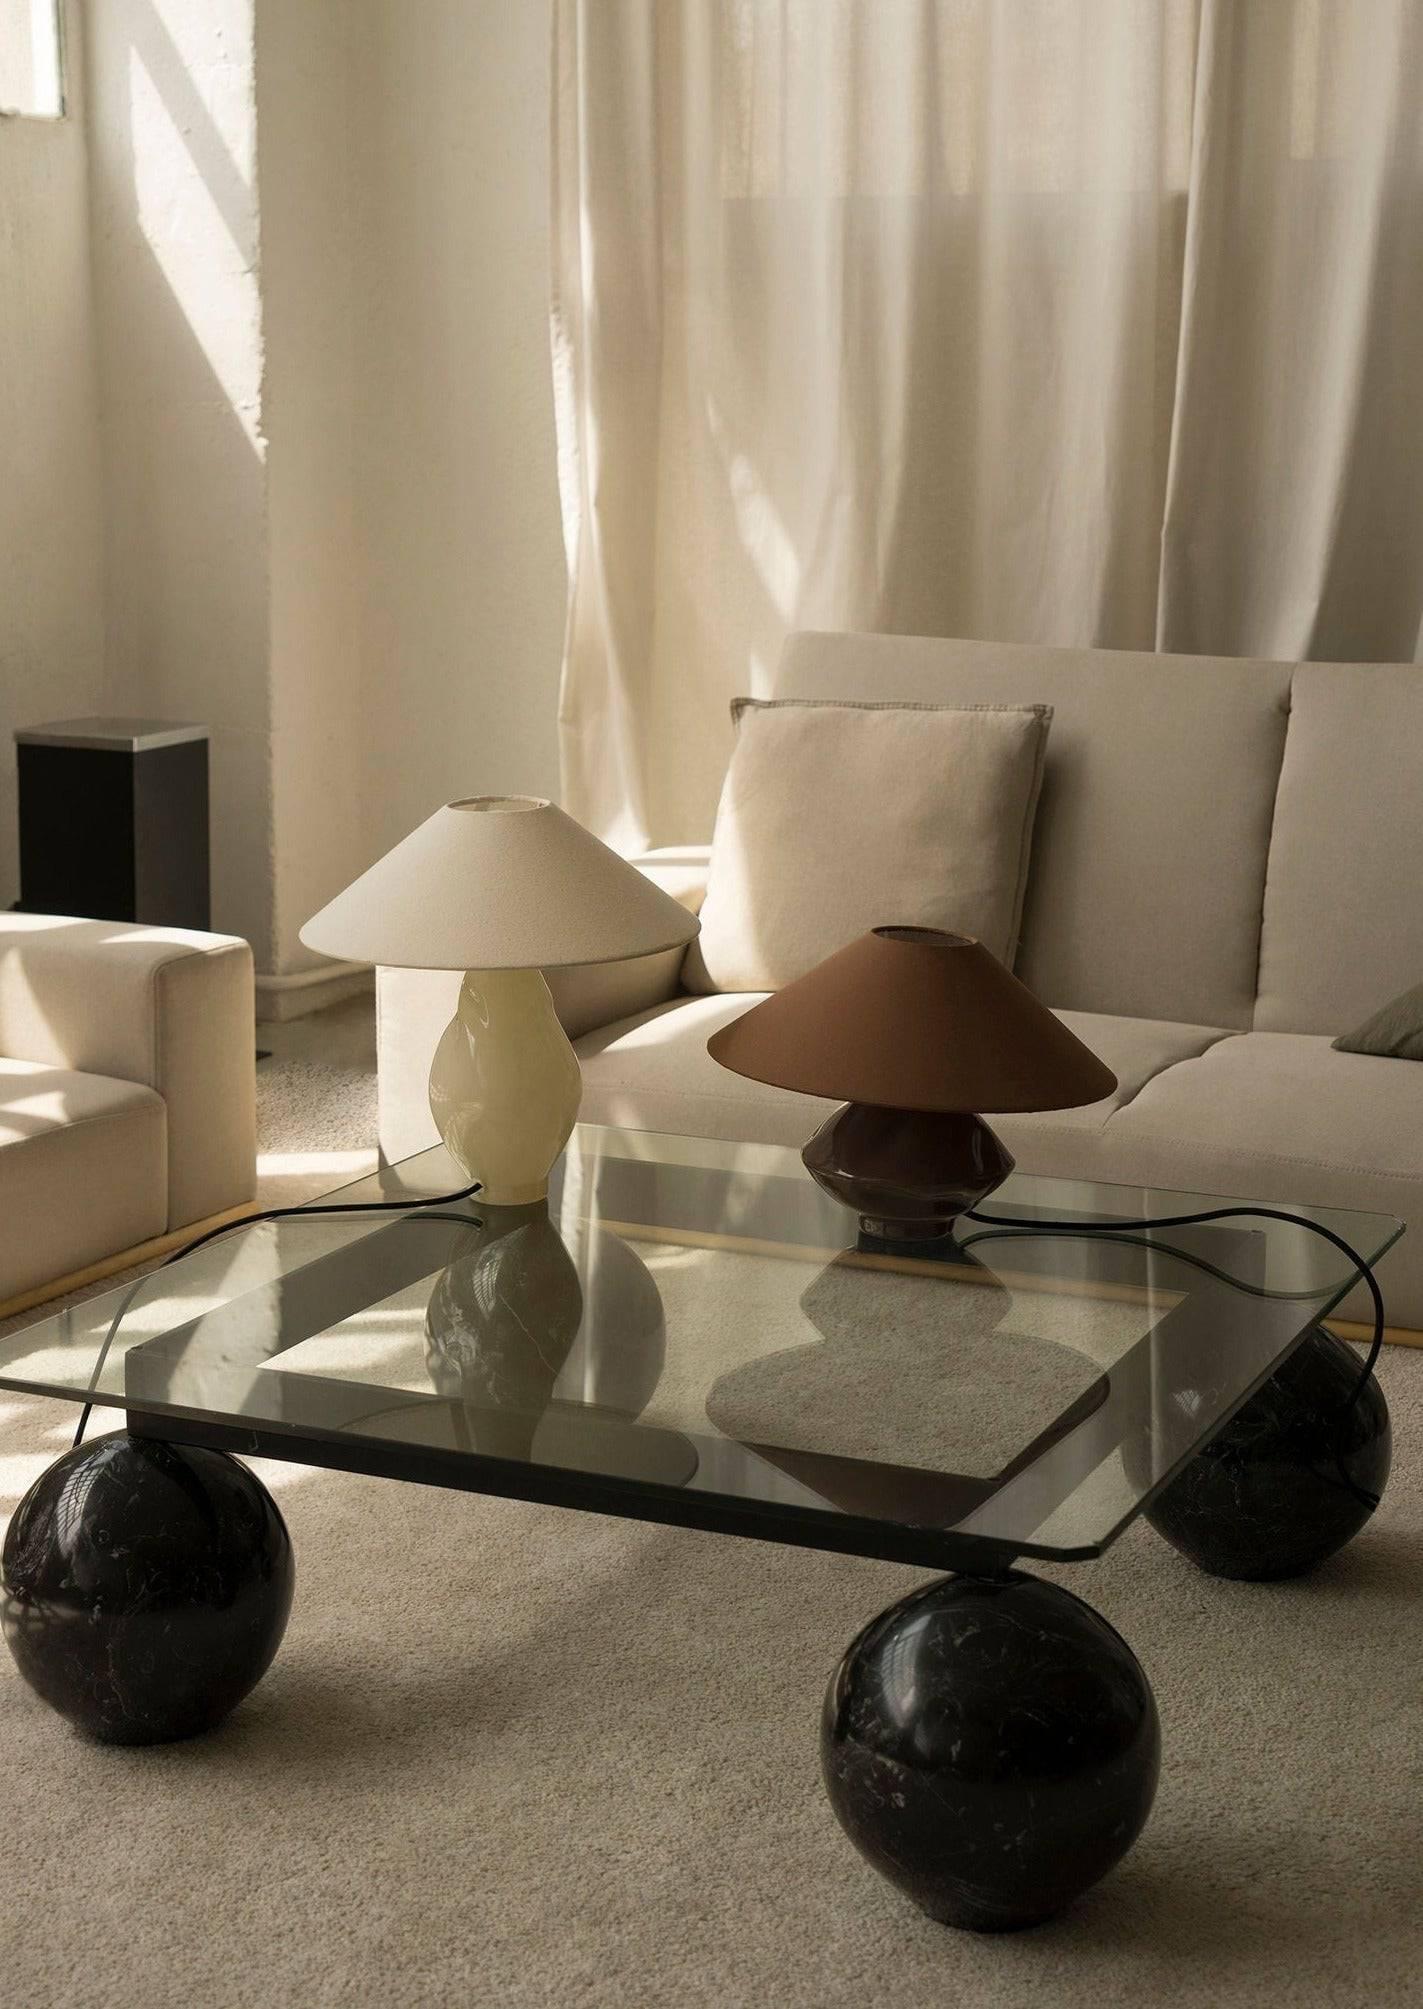 A modern living room featuring a glass coffee table supported by black spherical legs, two Los Objetos Decorativos beige conical glass lamps, and a beige sofa in a room with soft natural lighting and white curtains exuding interior elegance.